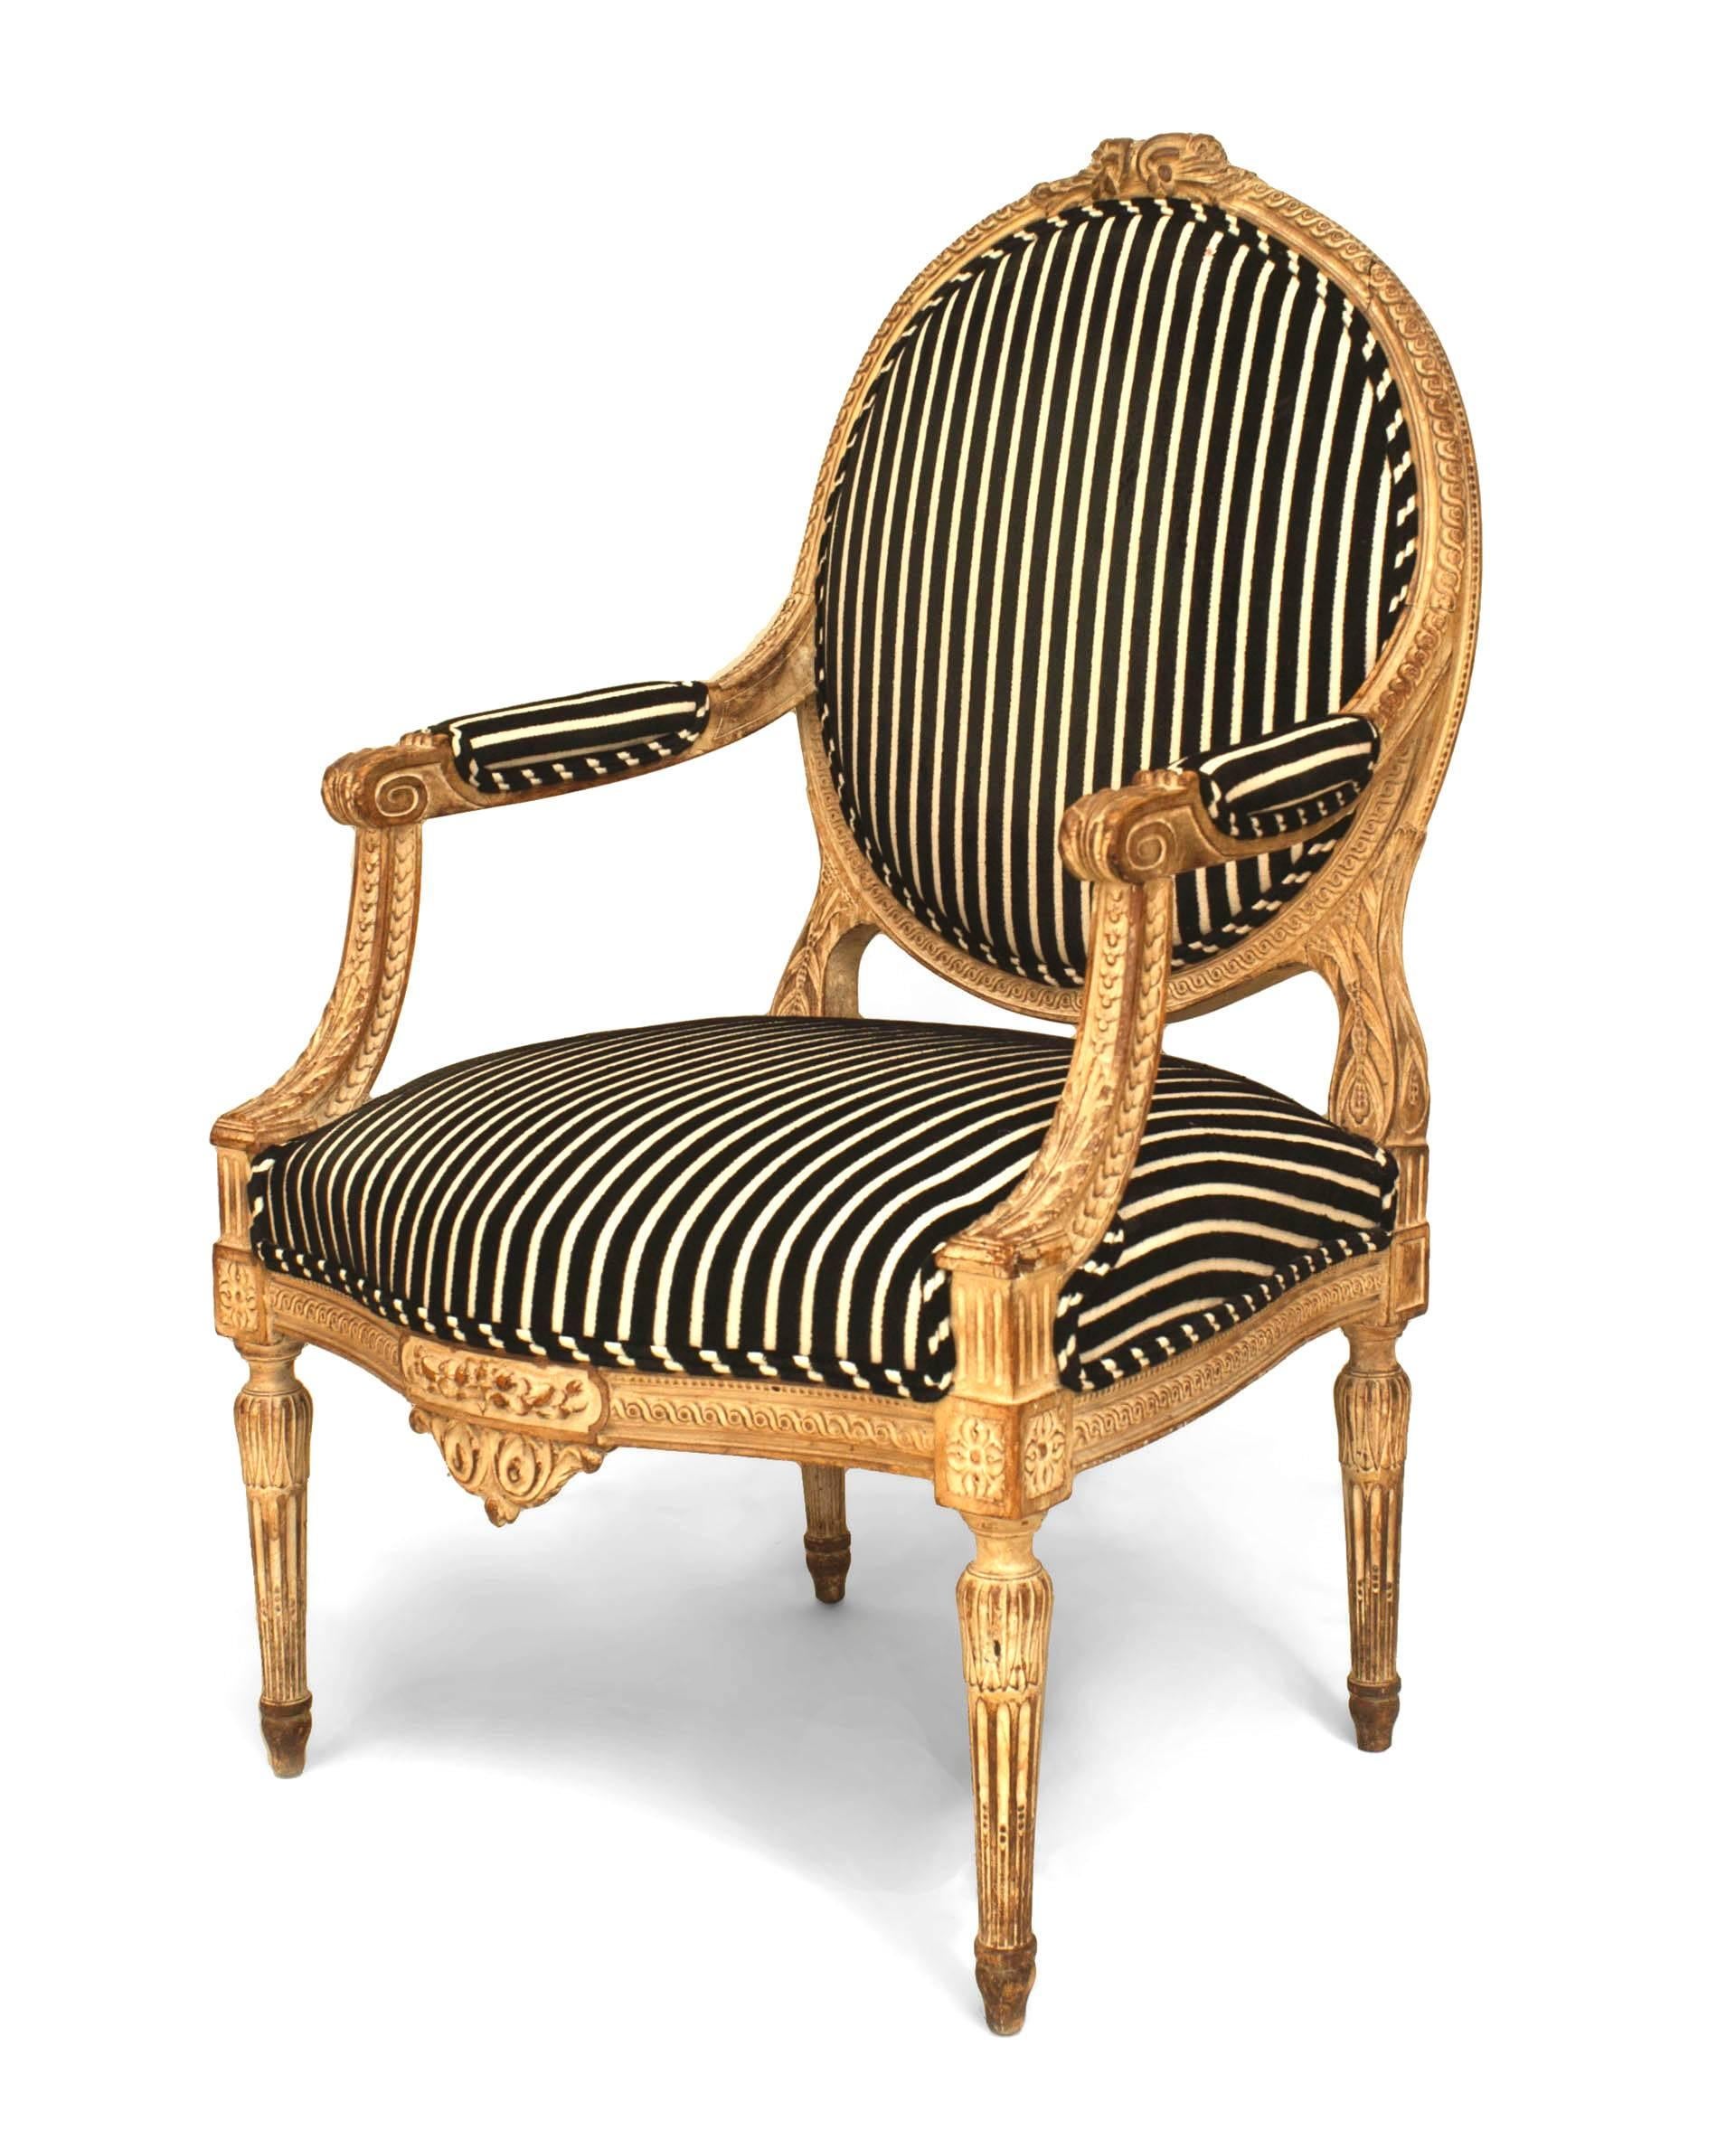 French Louis XVI style (19th Cent) arm chair with an oval back and carved crest and front rail with a black and white striped upholstery.
